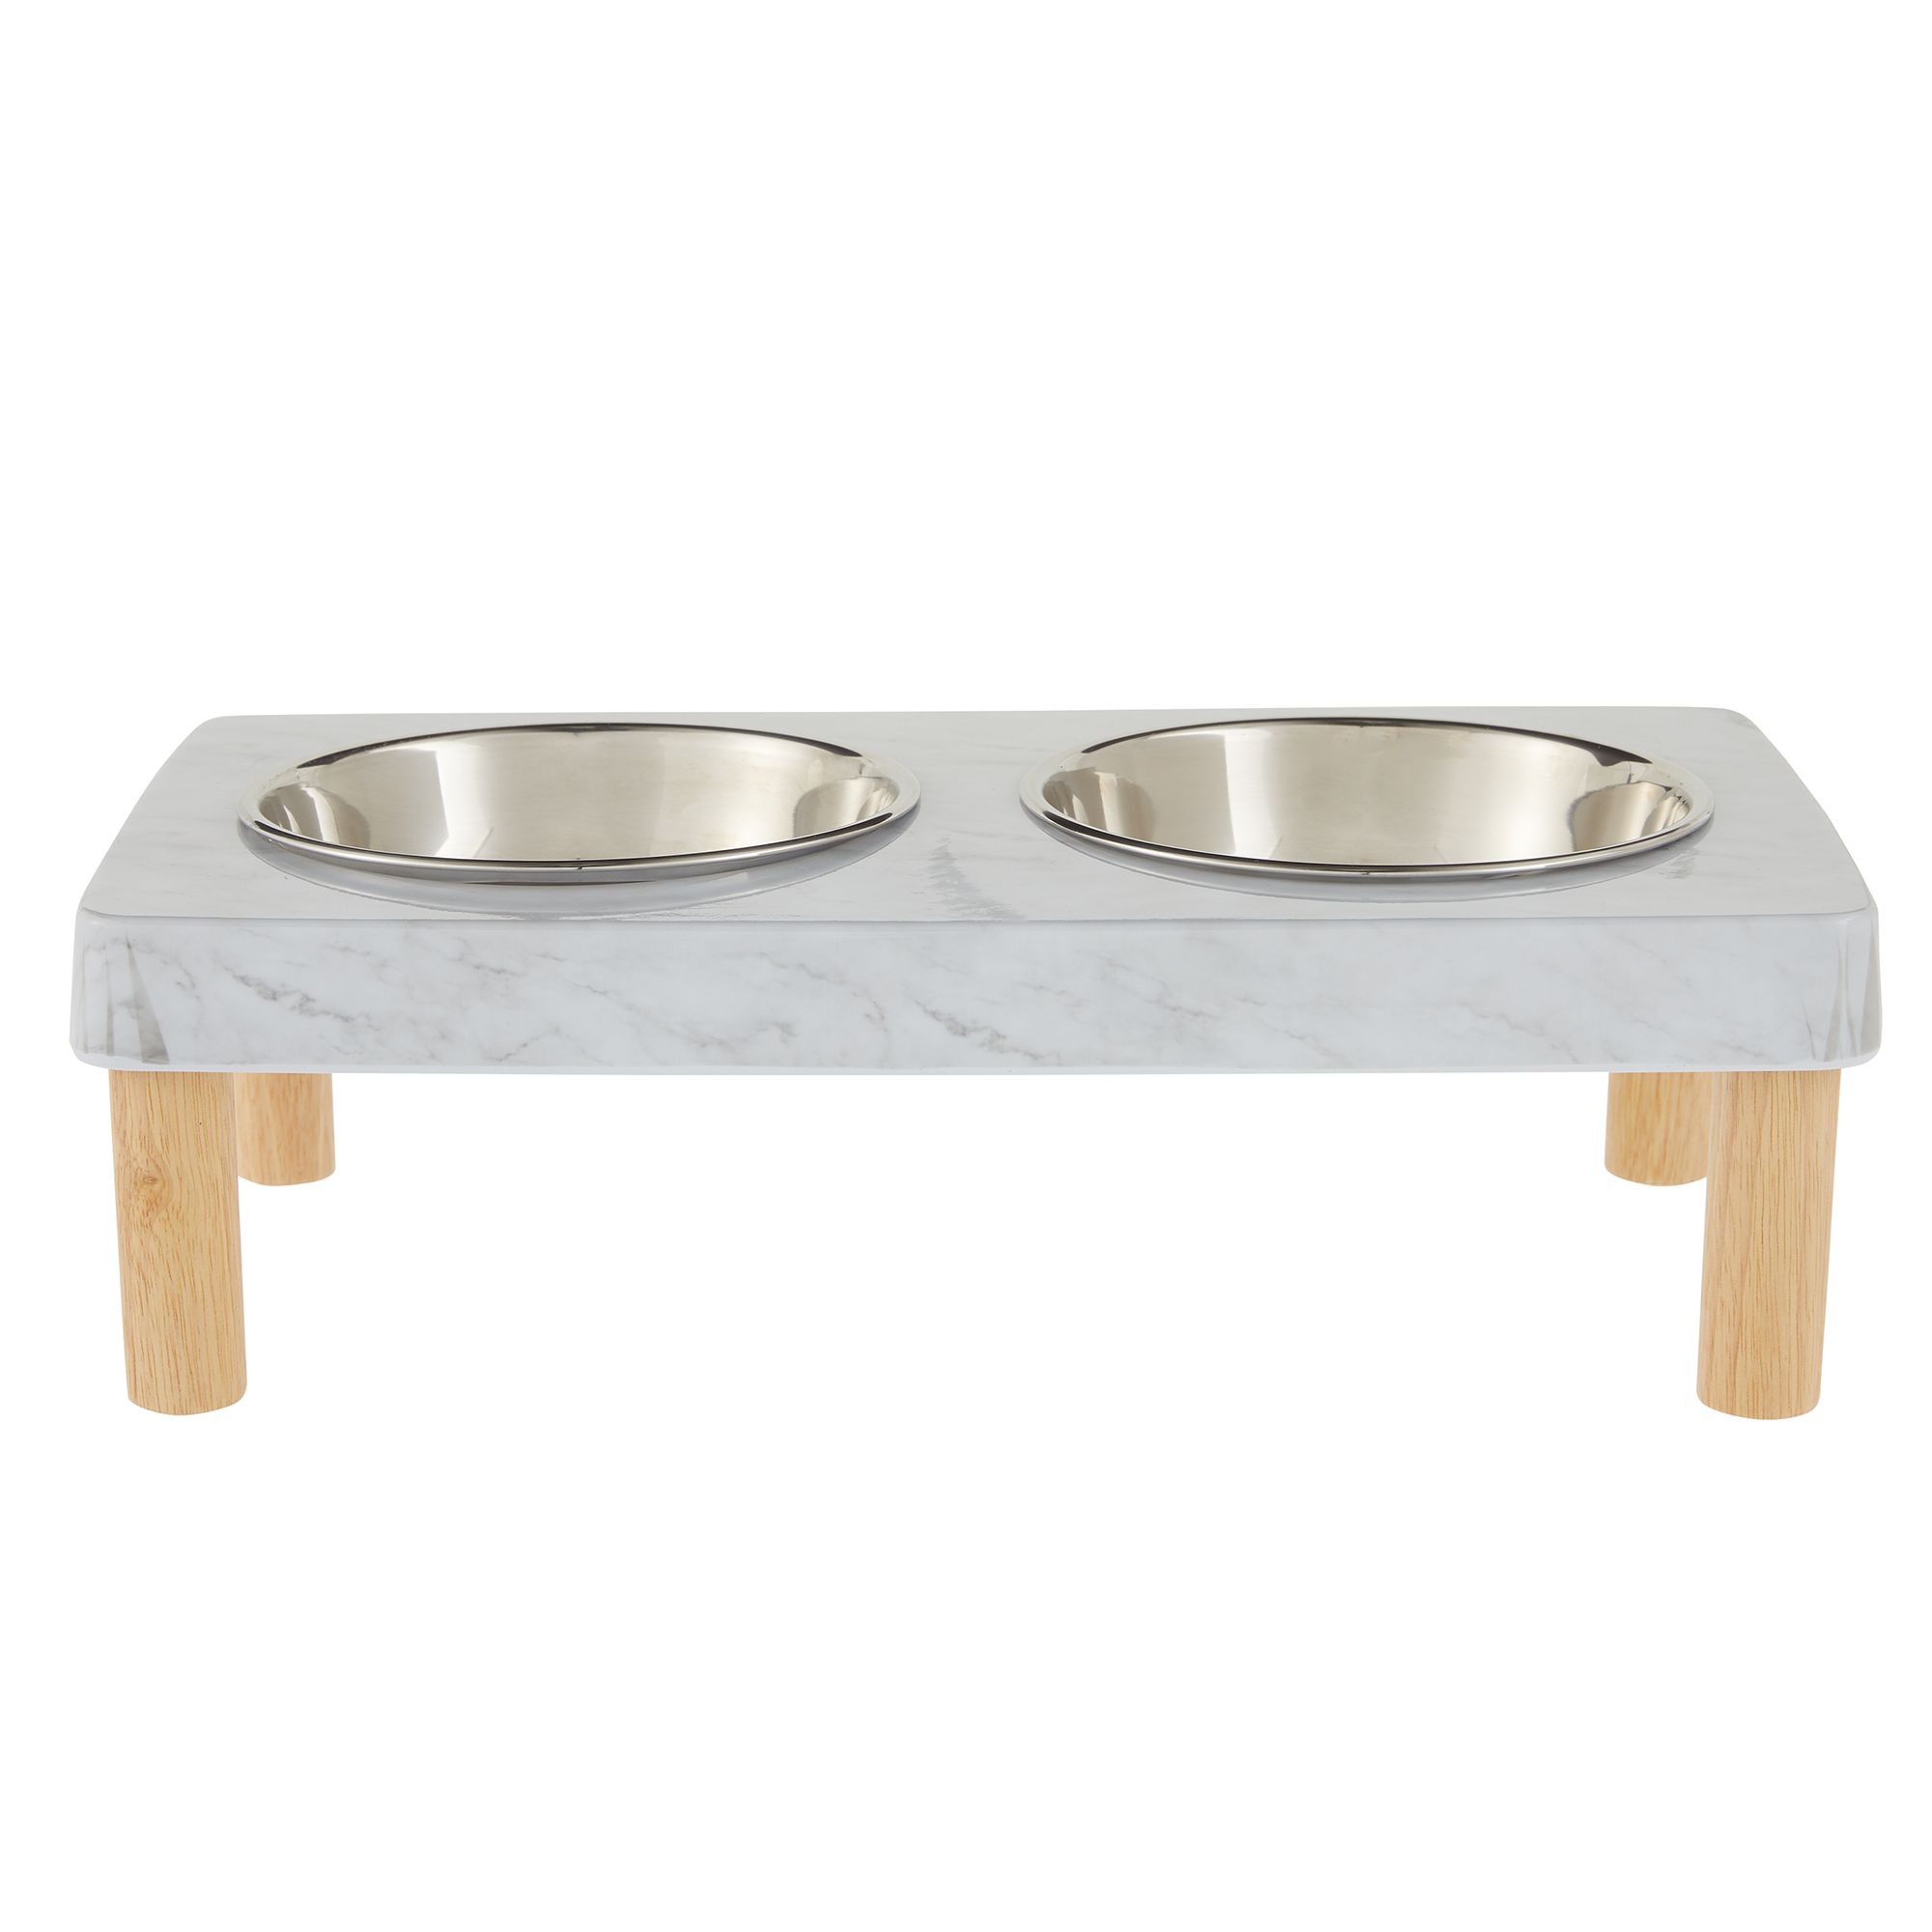 elevated pet bowl stand